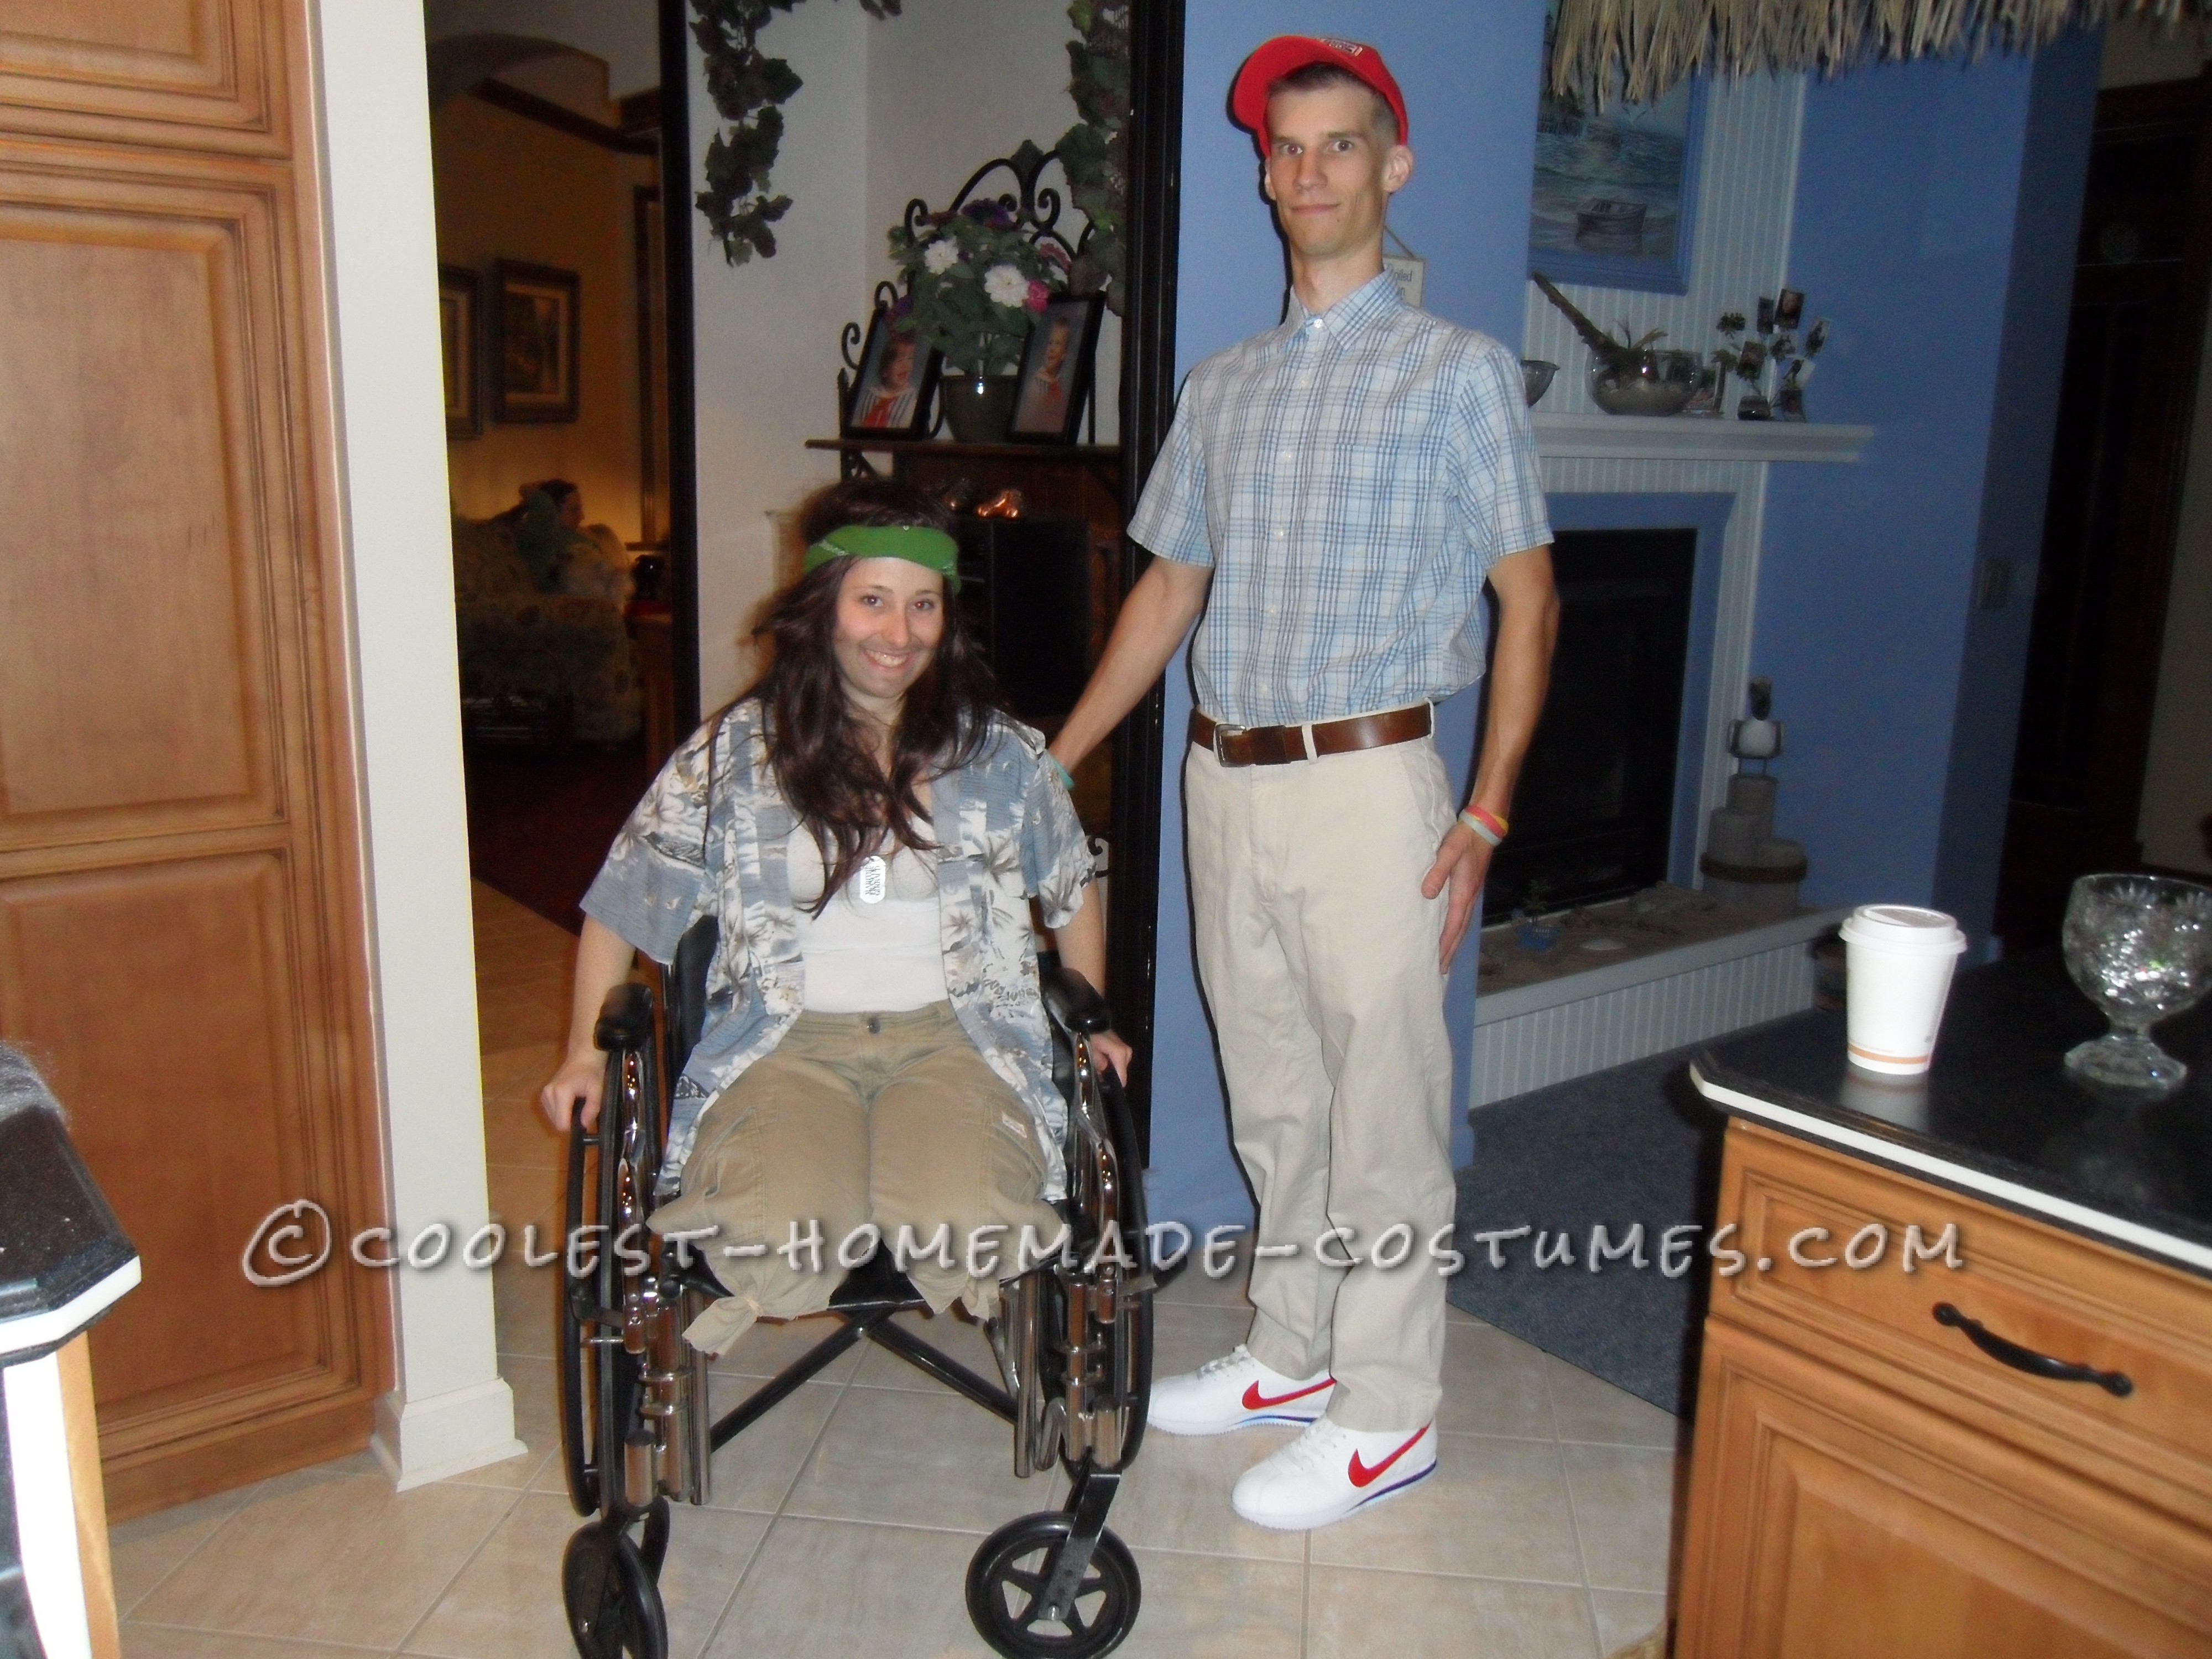 Lt. Dan and Forrest Gump Couple Halloween Costumes